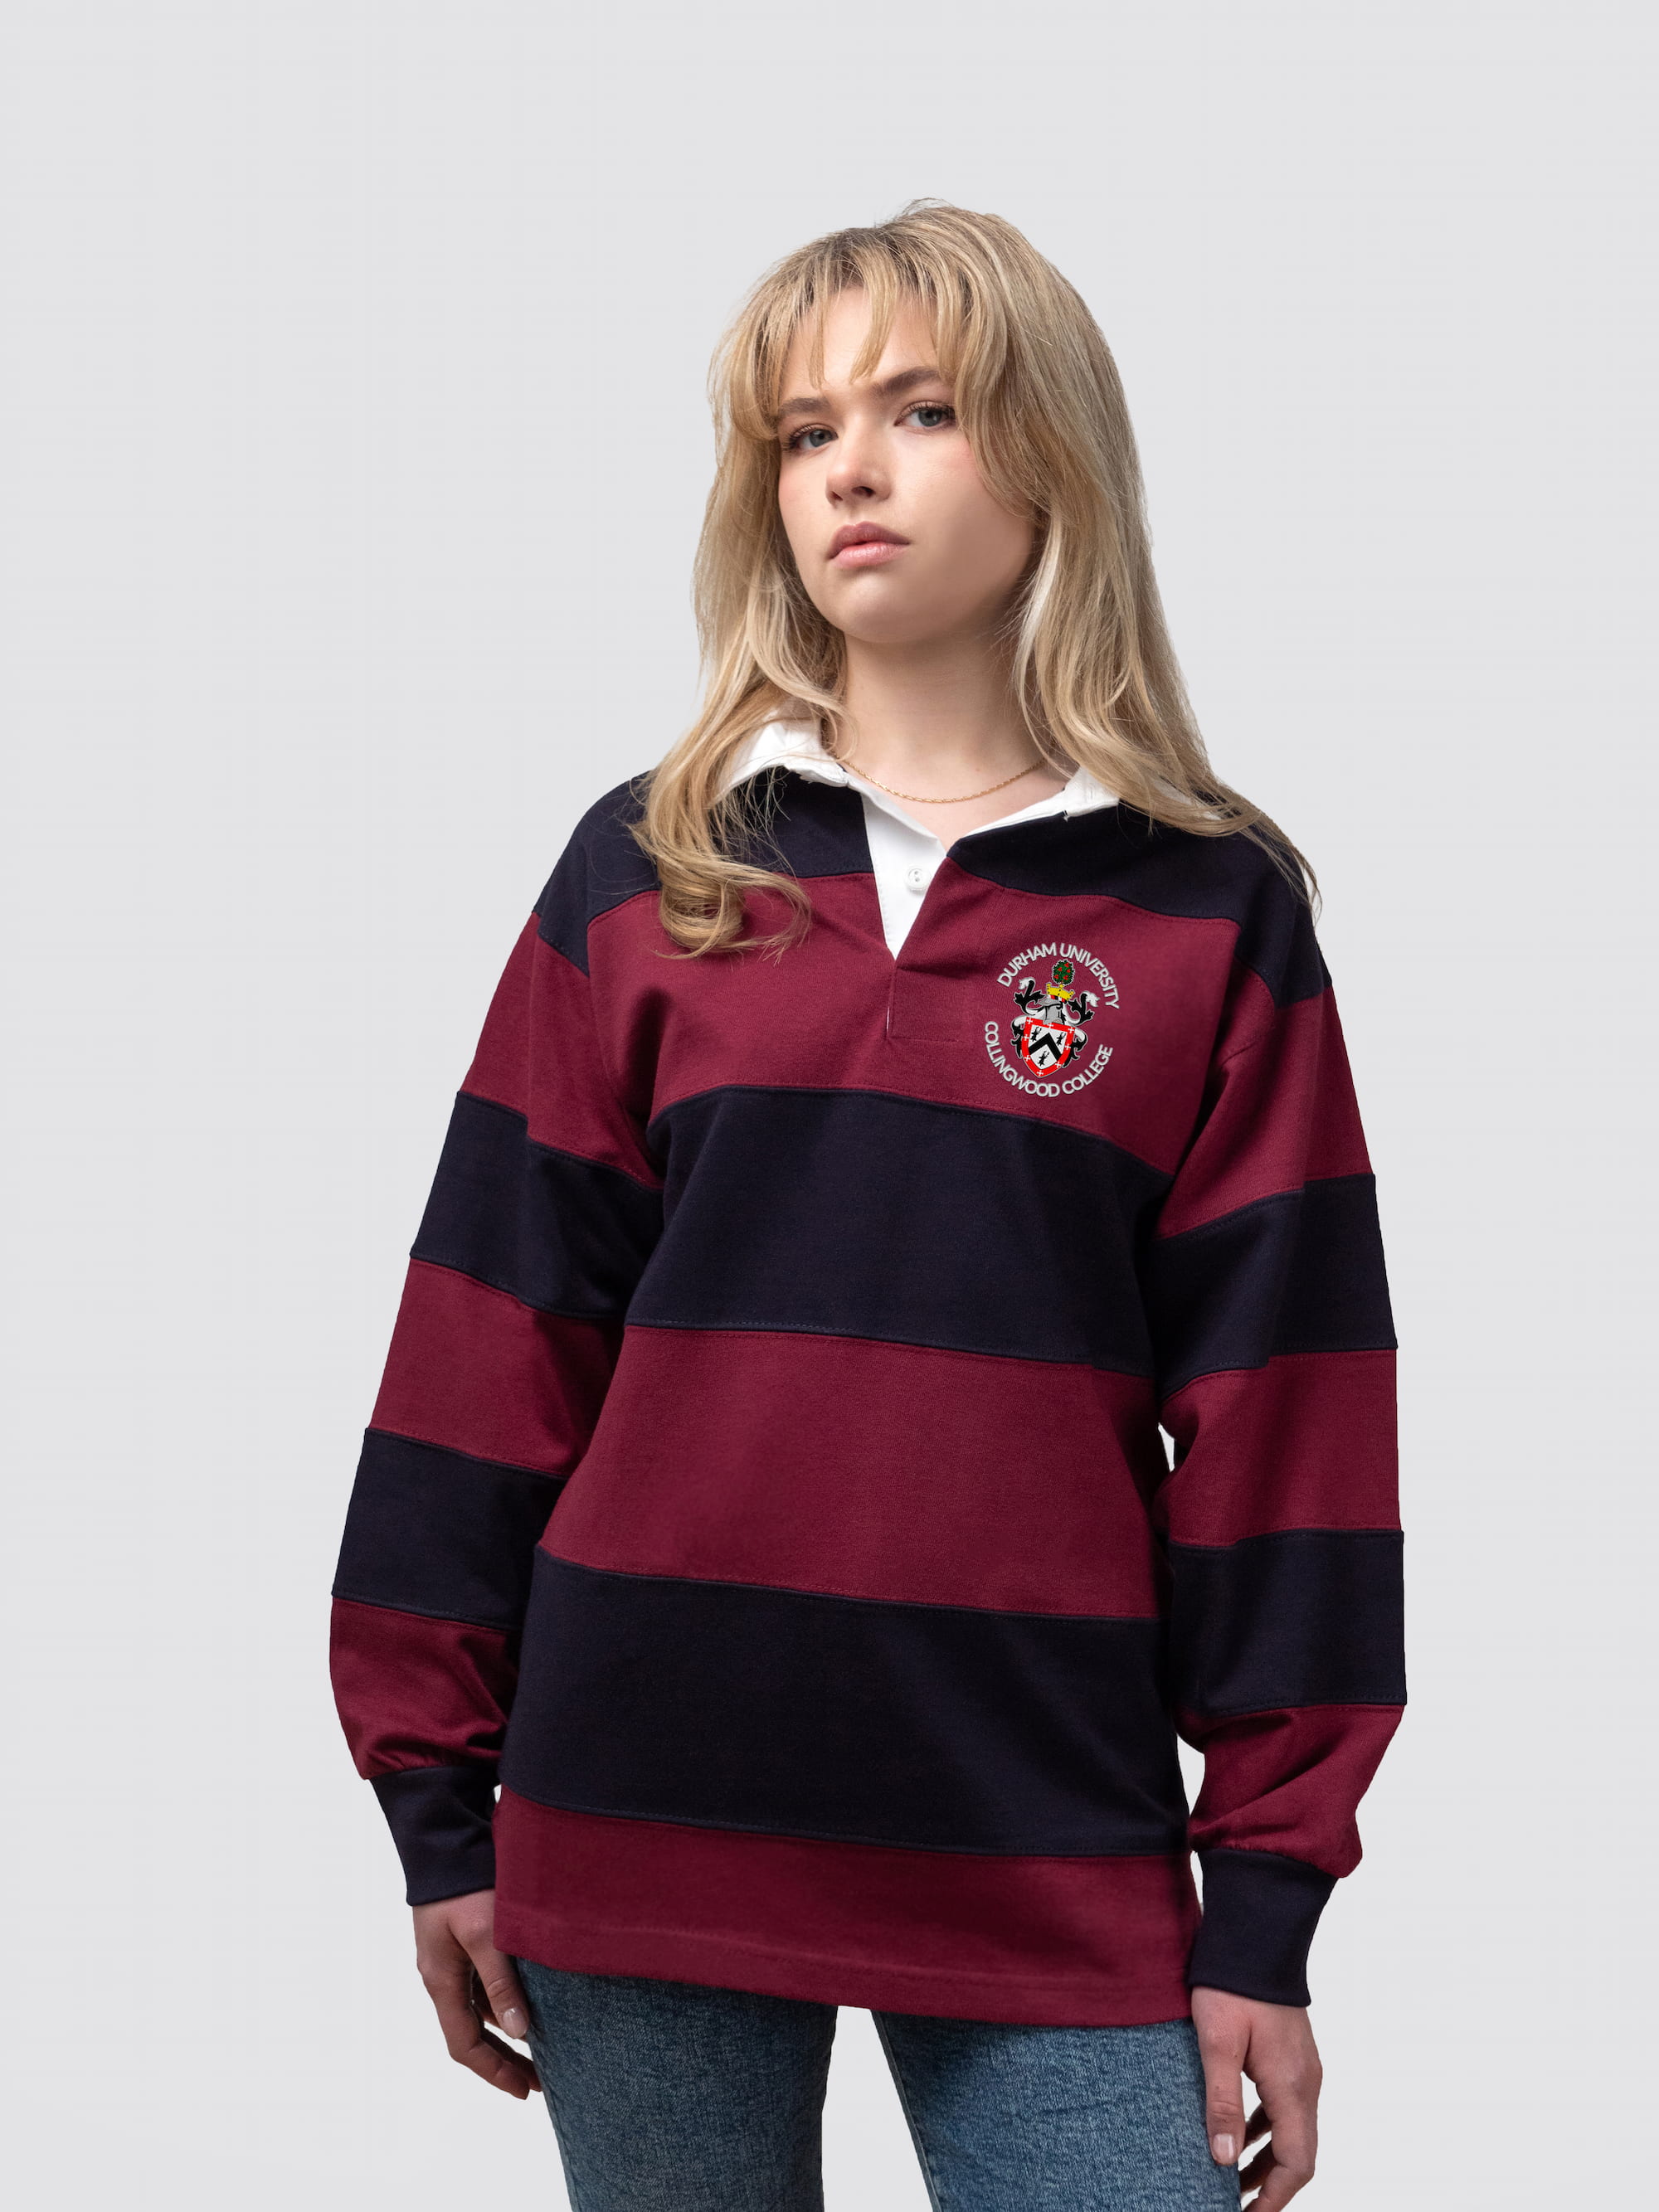 Collingwood College rugby shirt, with burgundy and navy stripes